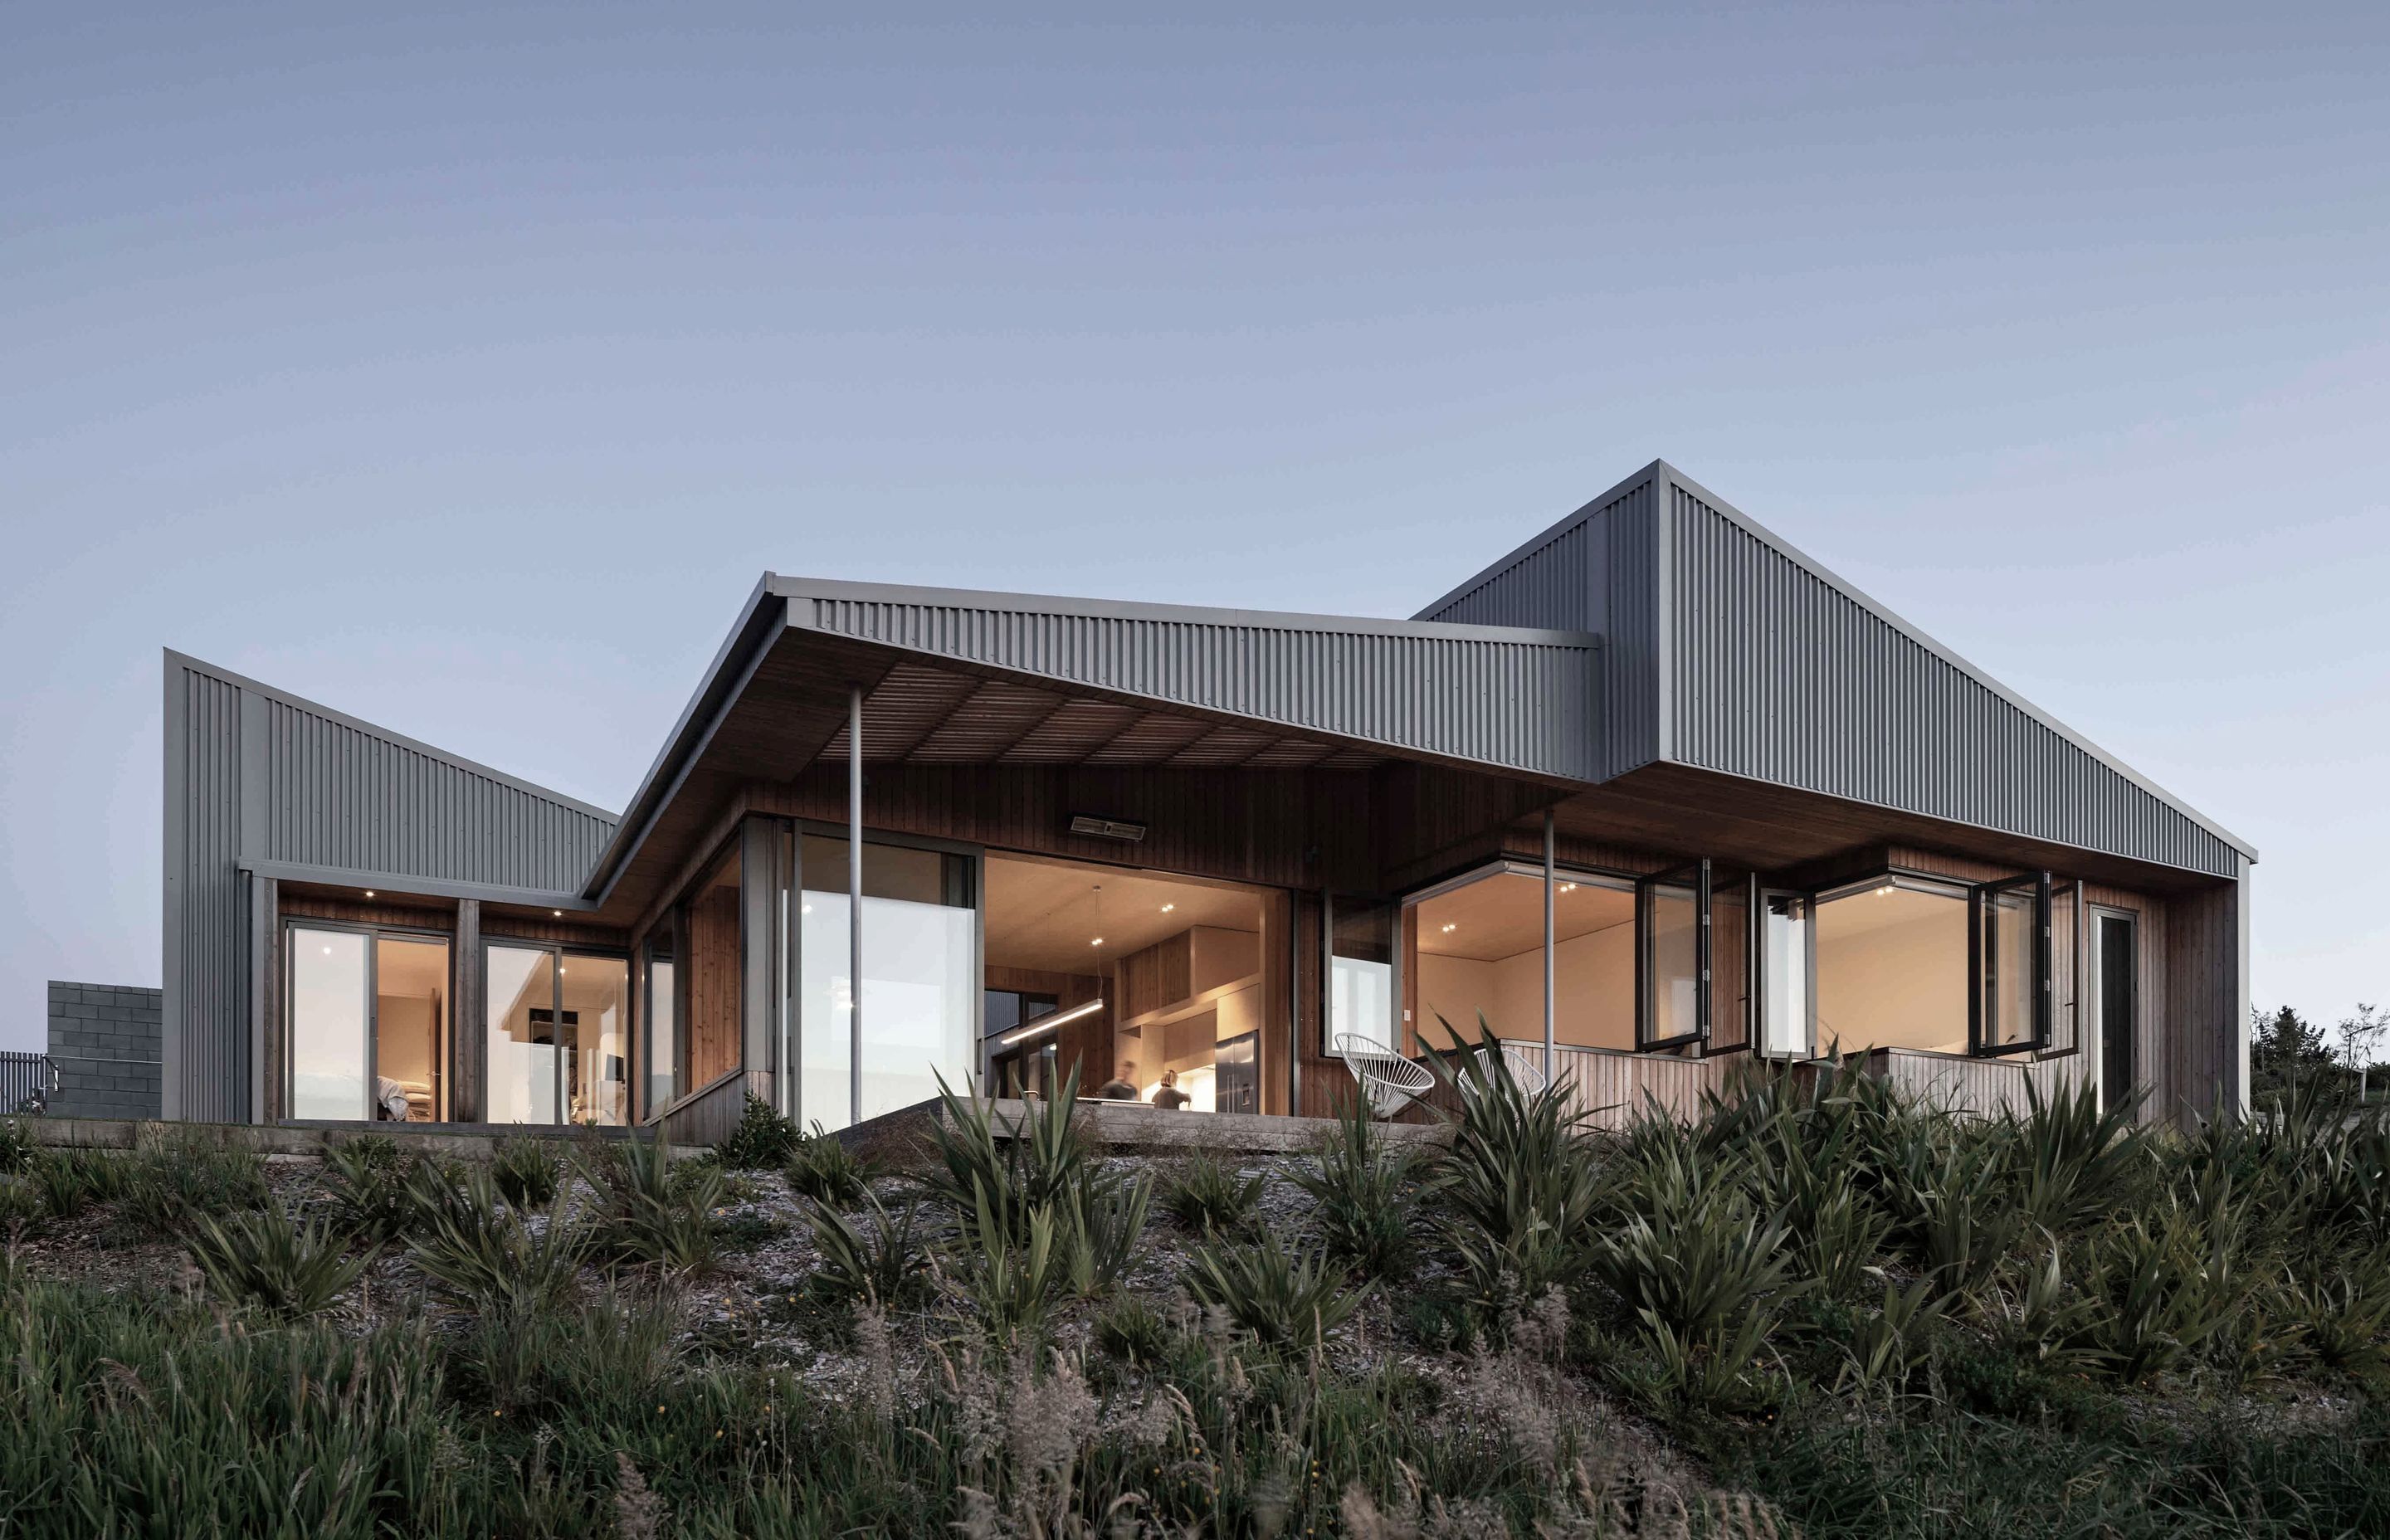 The exterior materiality features a corrugated cladding that ties into the rural typology of the home.